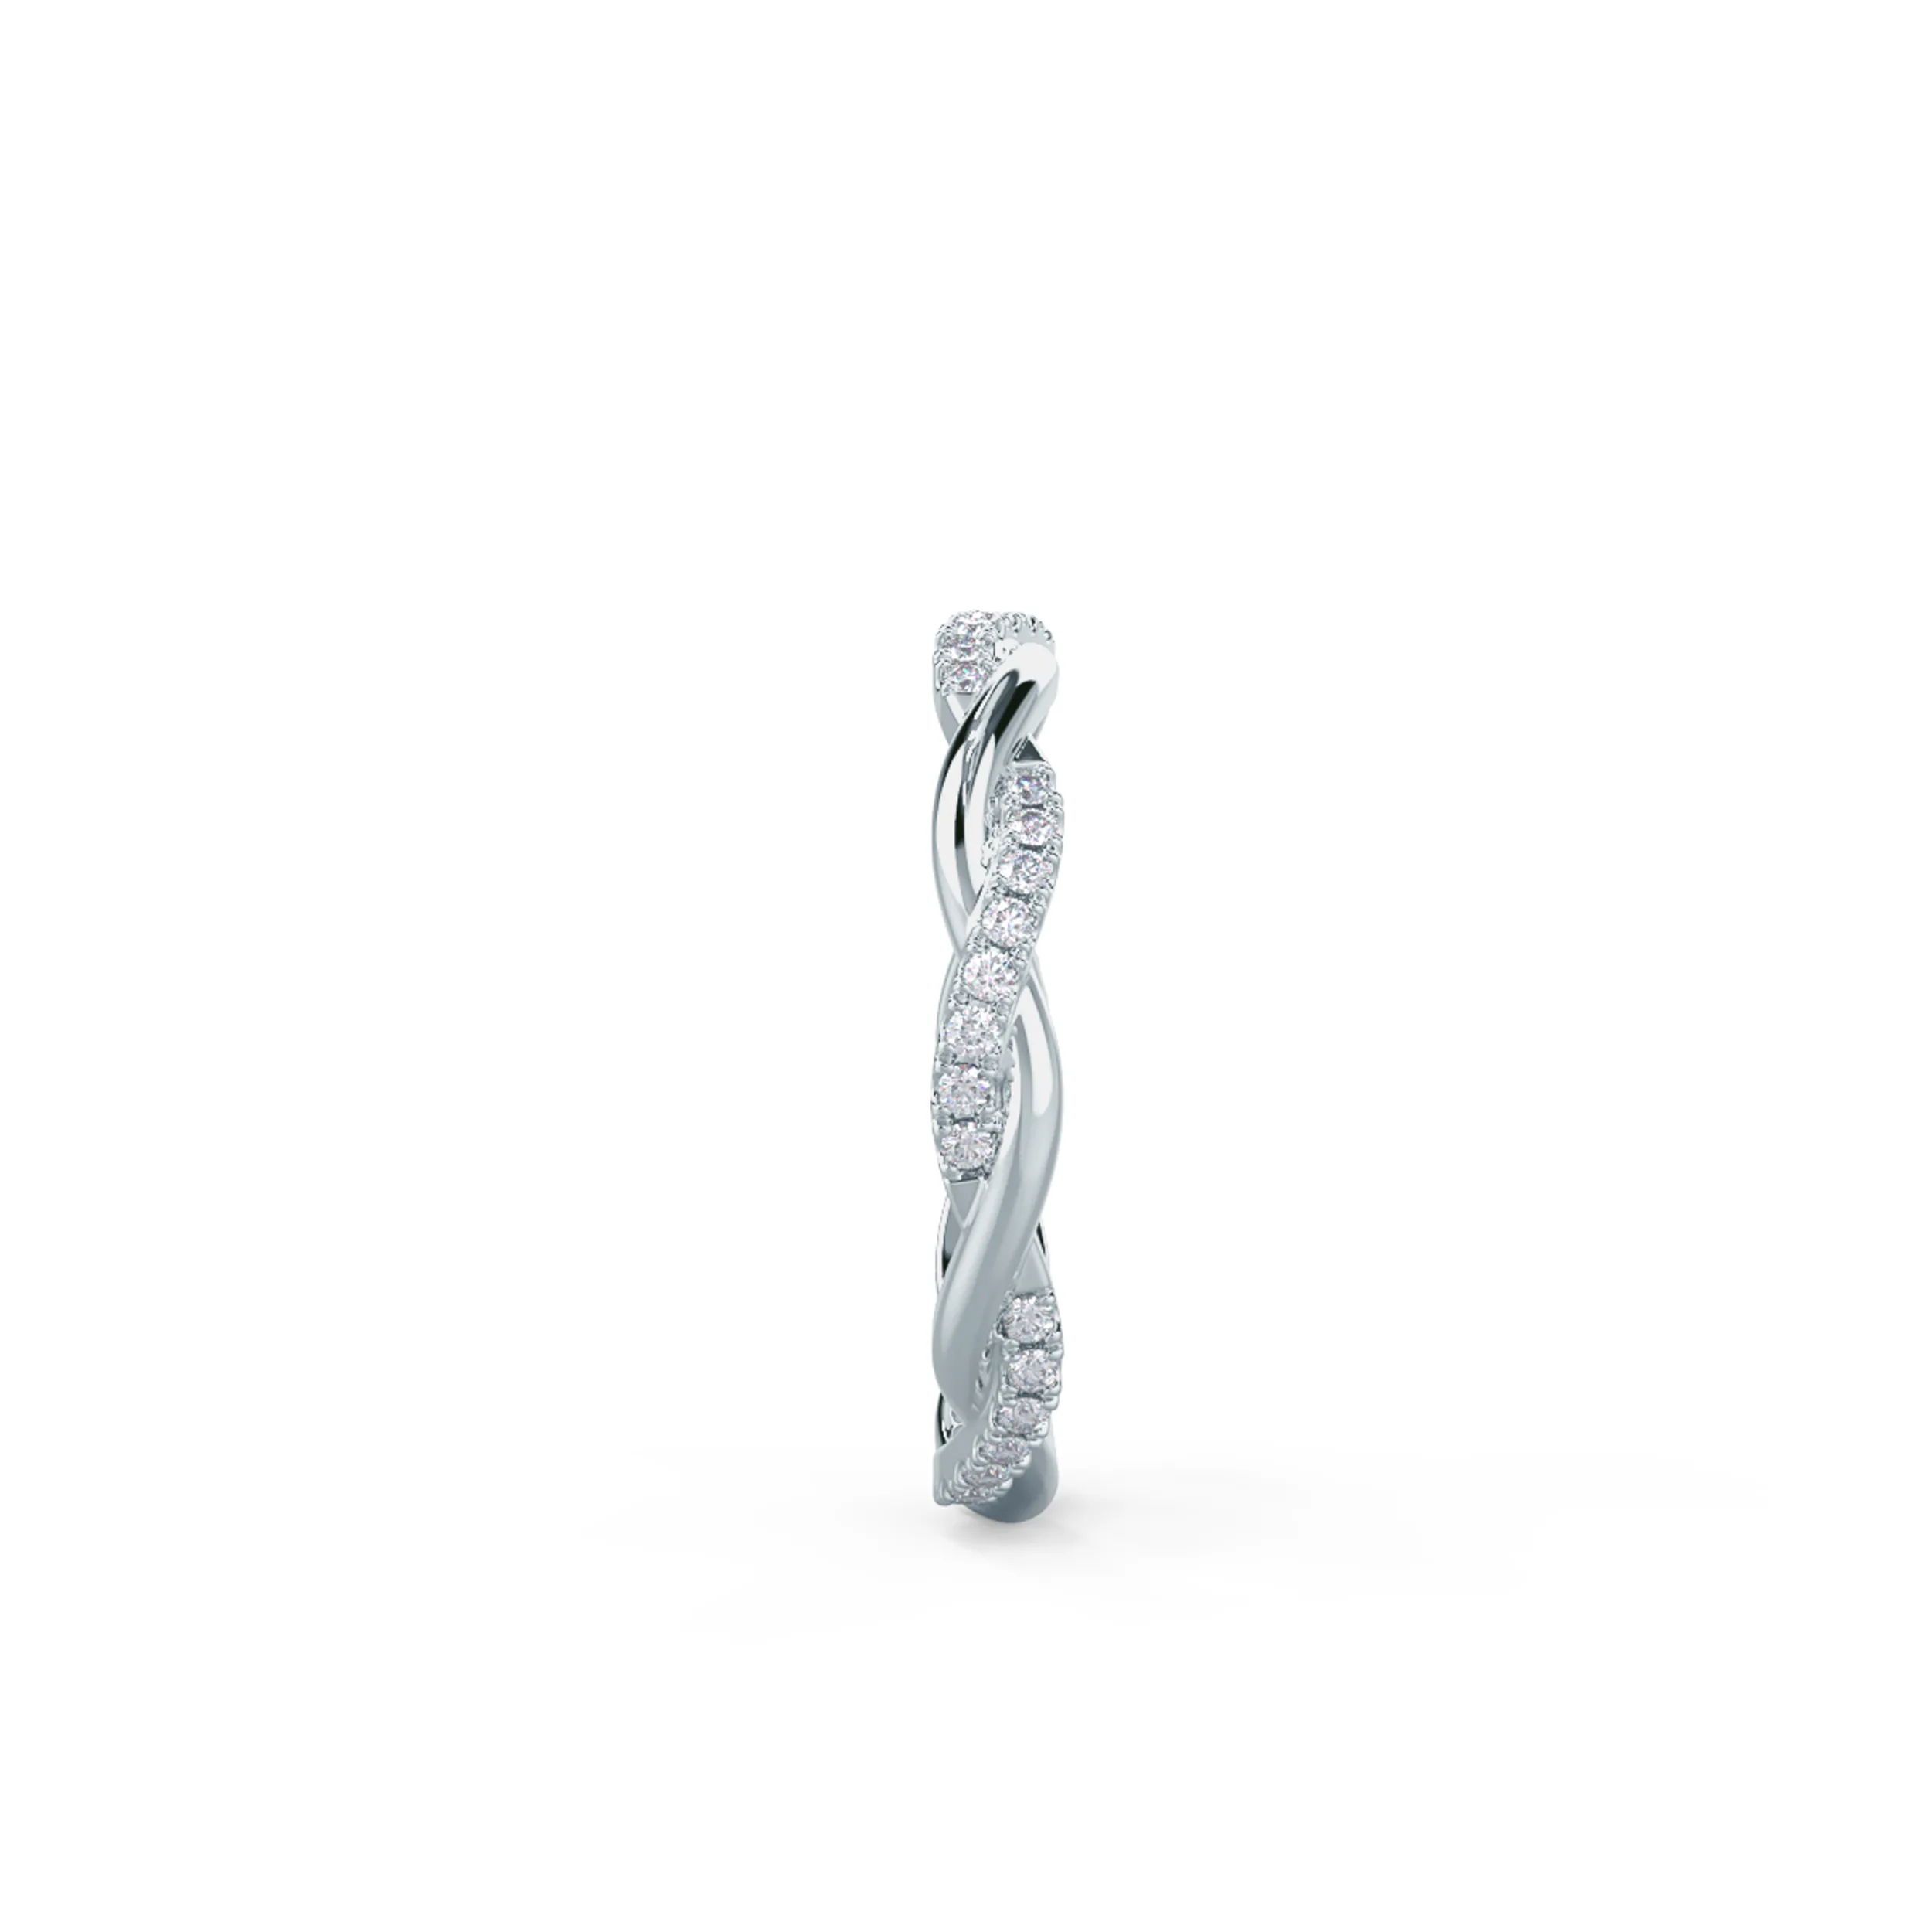 0.25 Carat Round Created Diamonds set in 18k White Gold Infinity Twisting Light Eternity Band (Side View)